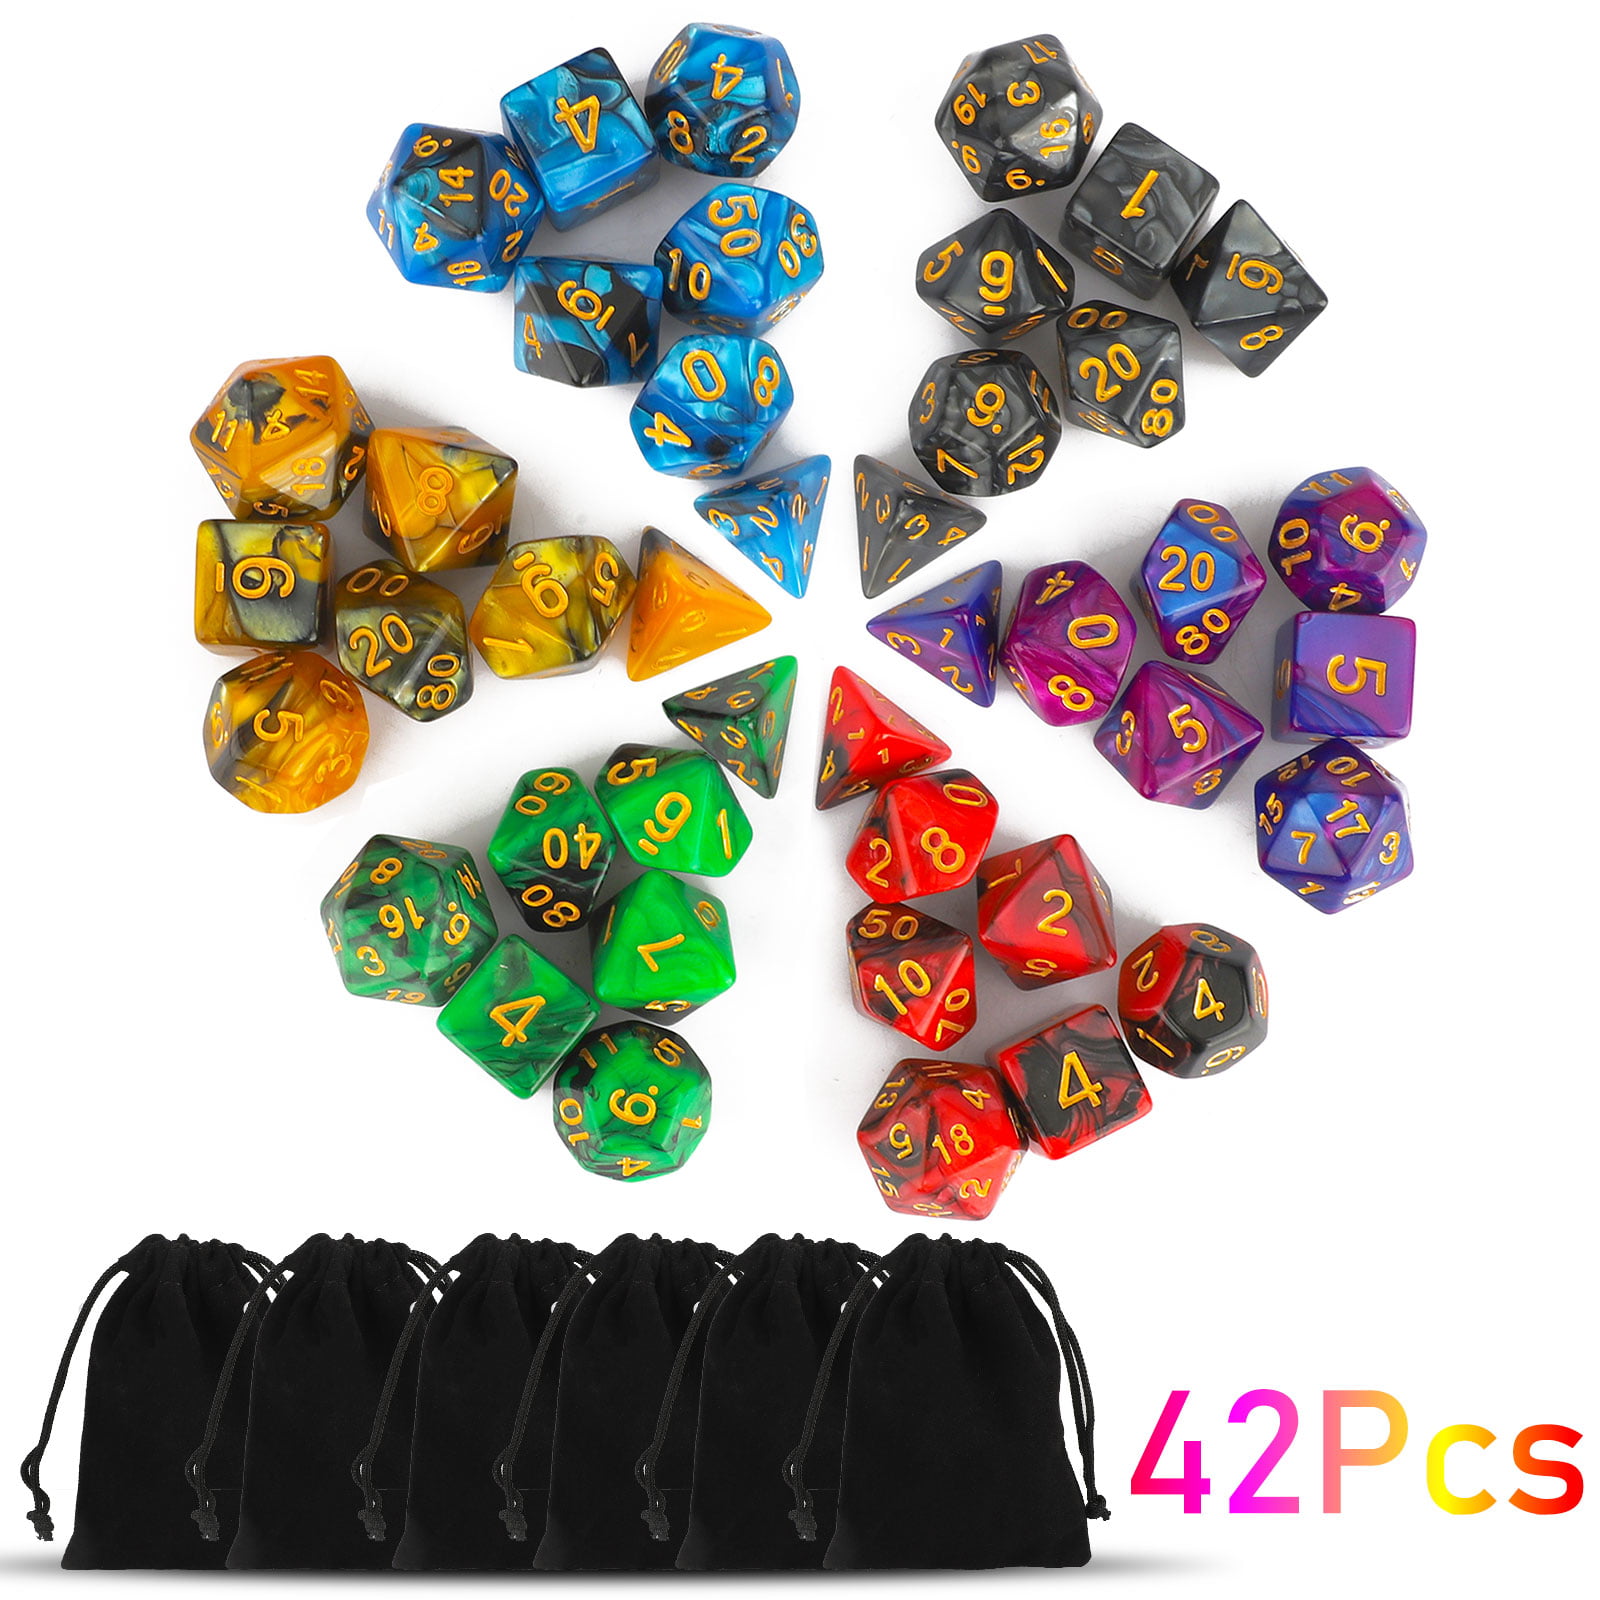 Polyhedral Dice Set, TSV 42Pcs DND Dice Set Fit for Dungeons and Dragons  RPG MTG Table Games, 6 x 7 Complete Double-Colors D&D Dice Sets D4 D6 D8  D10 